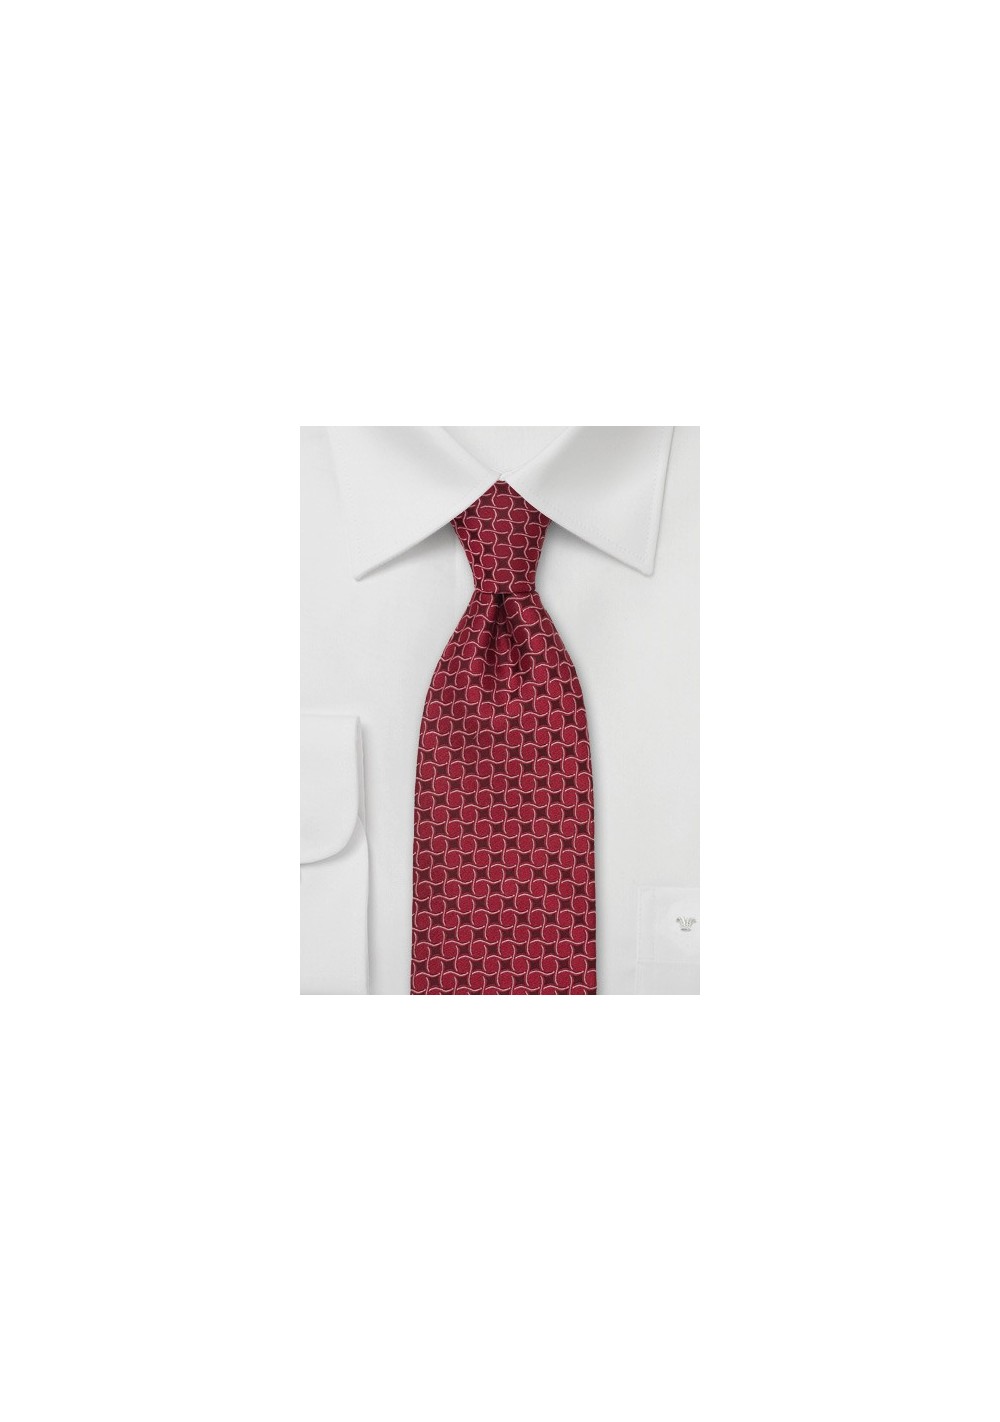 Persian Red Silk Tie by Chevalier